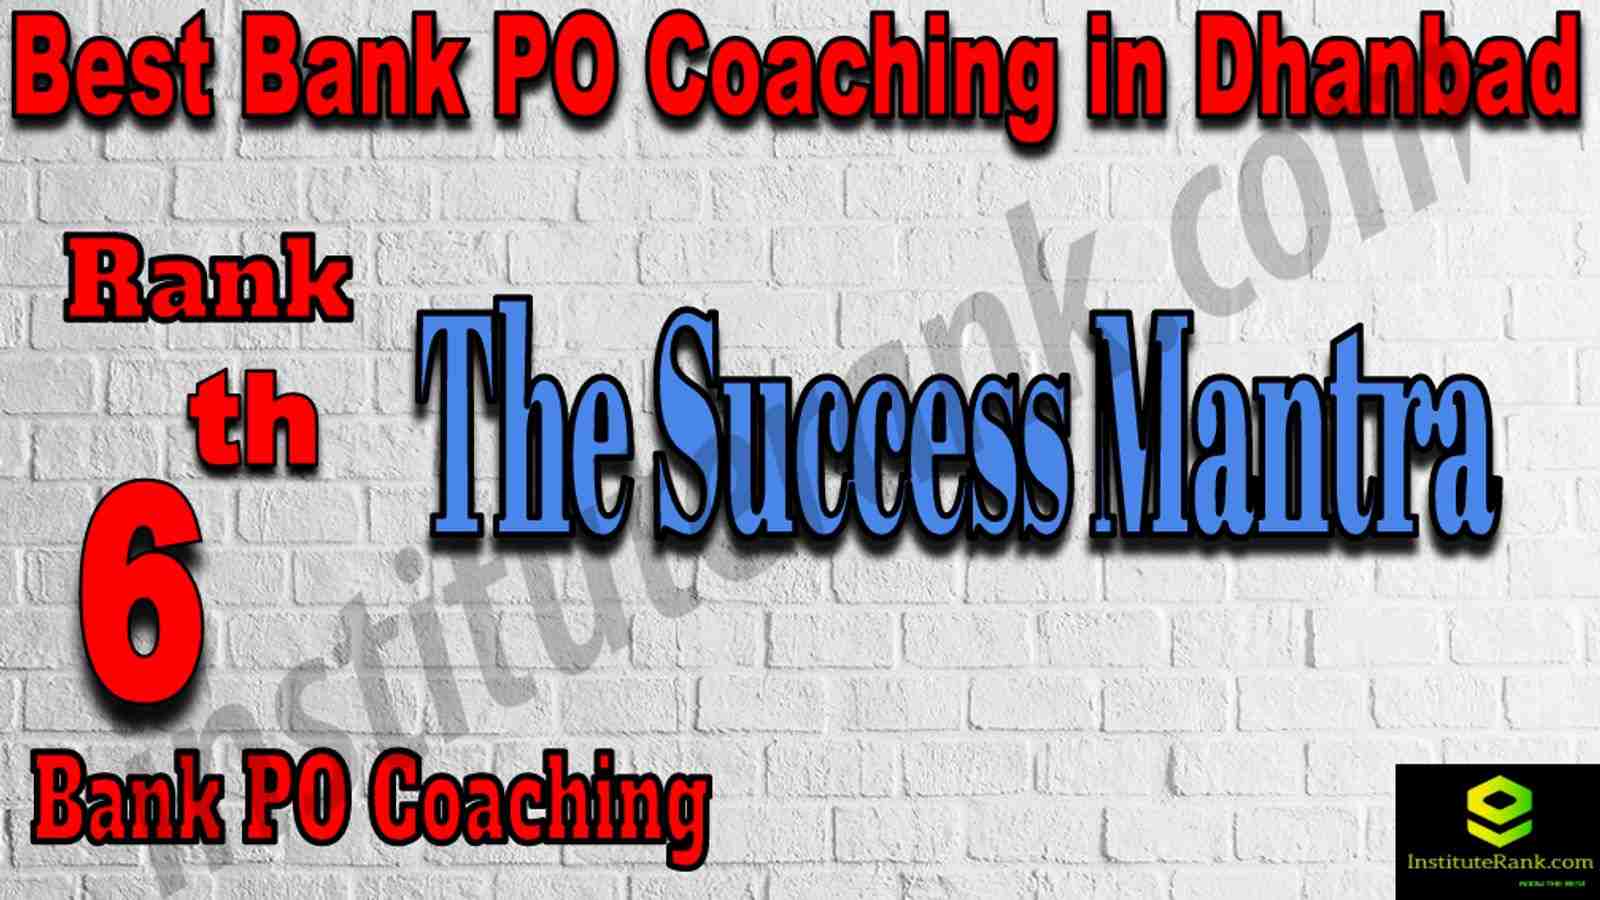 6th Best Bank PO Coaching in Dhanbad